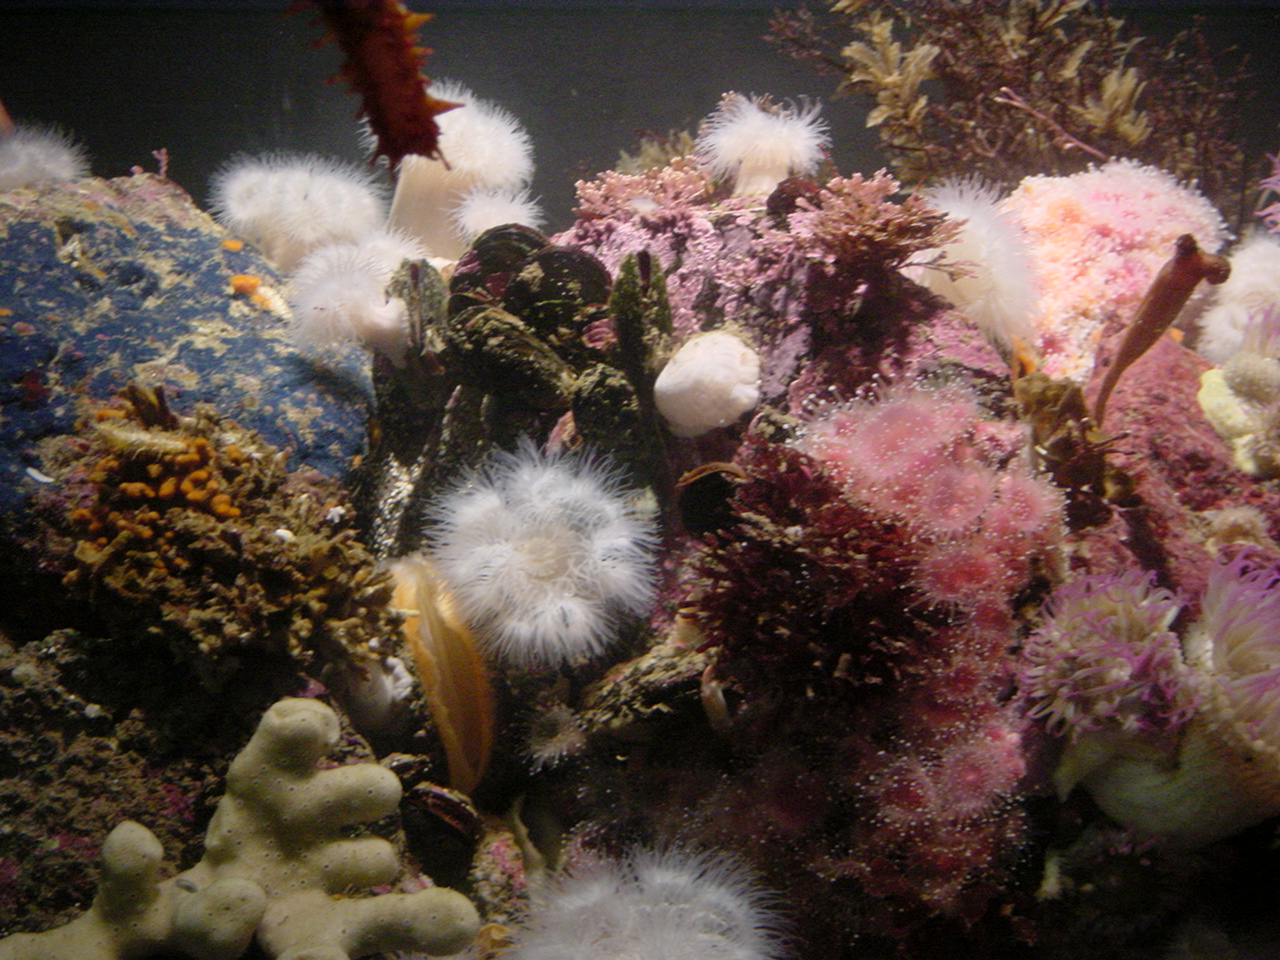 various sea animals are sitting together under some water